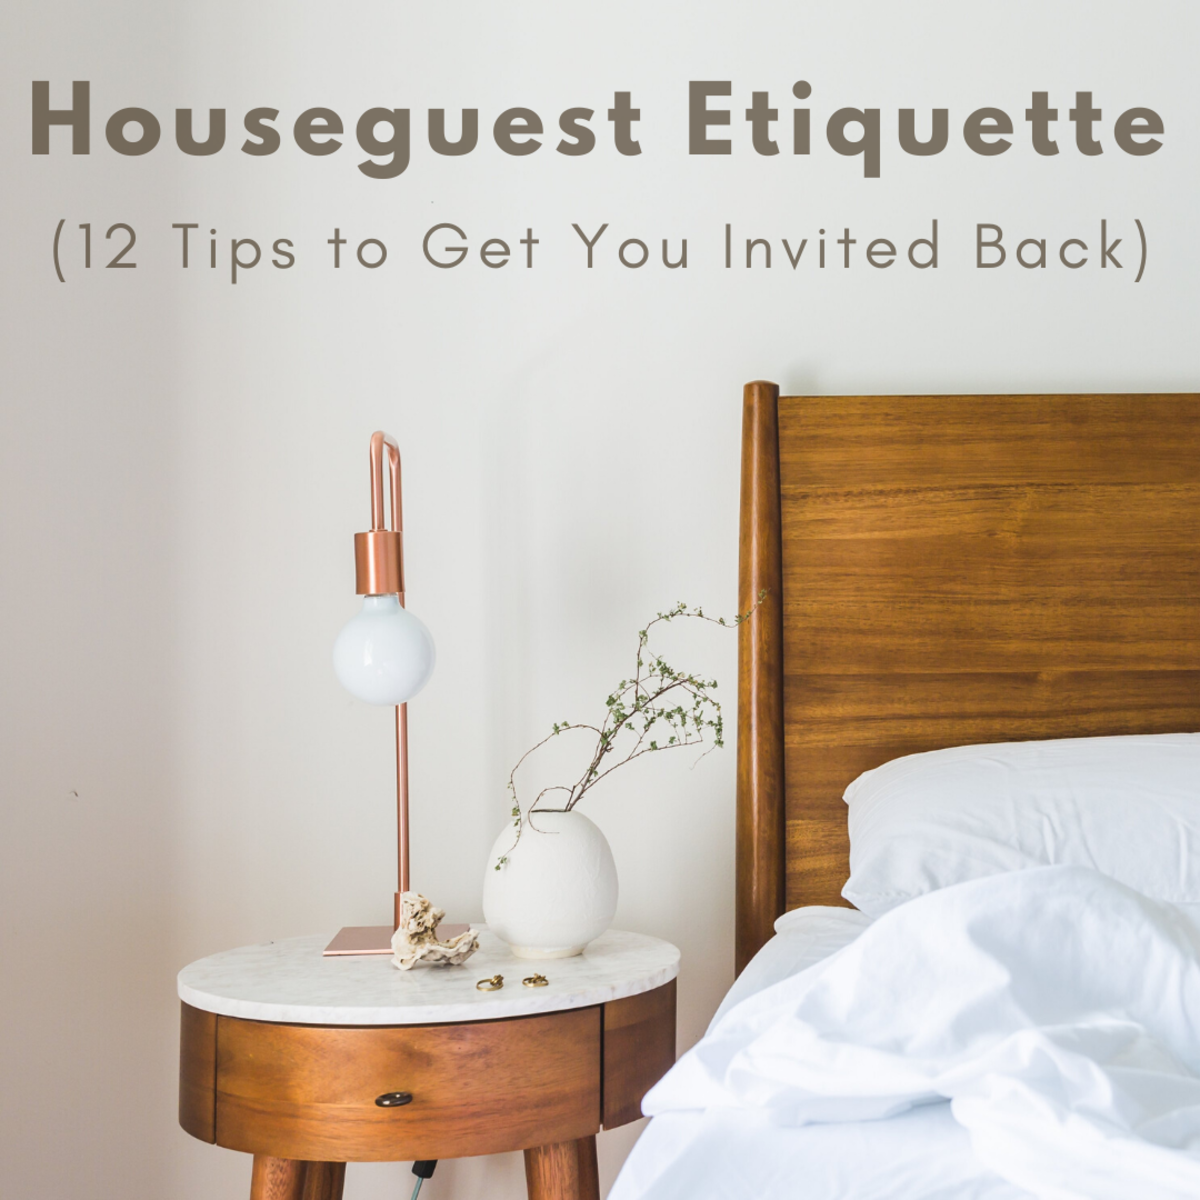 How to Be the Kind of Houseguest That Gets Invited Back